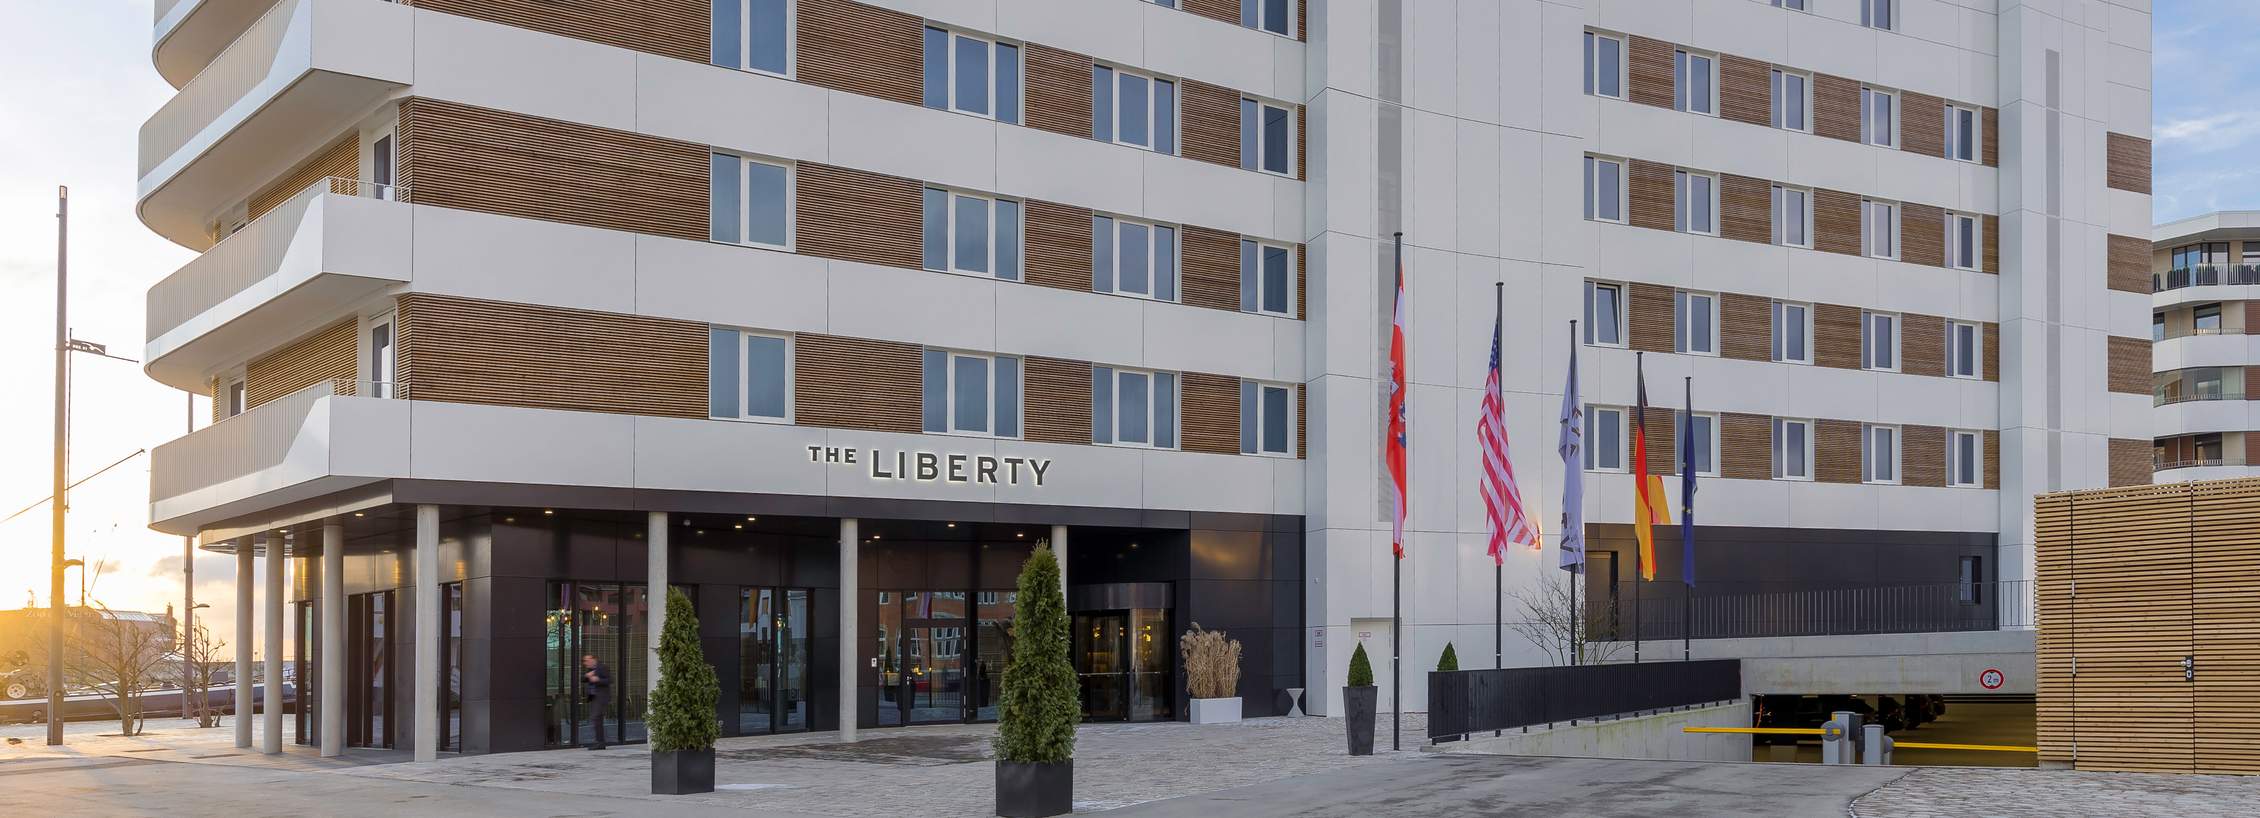 Themenhotel THE LIBERTY in Bremerhaven an der Nordsee